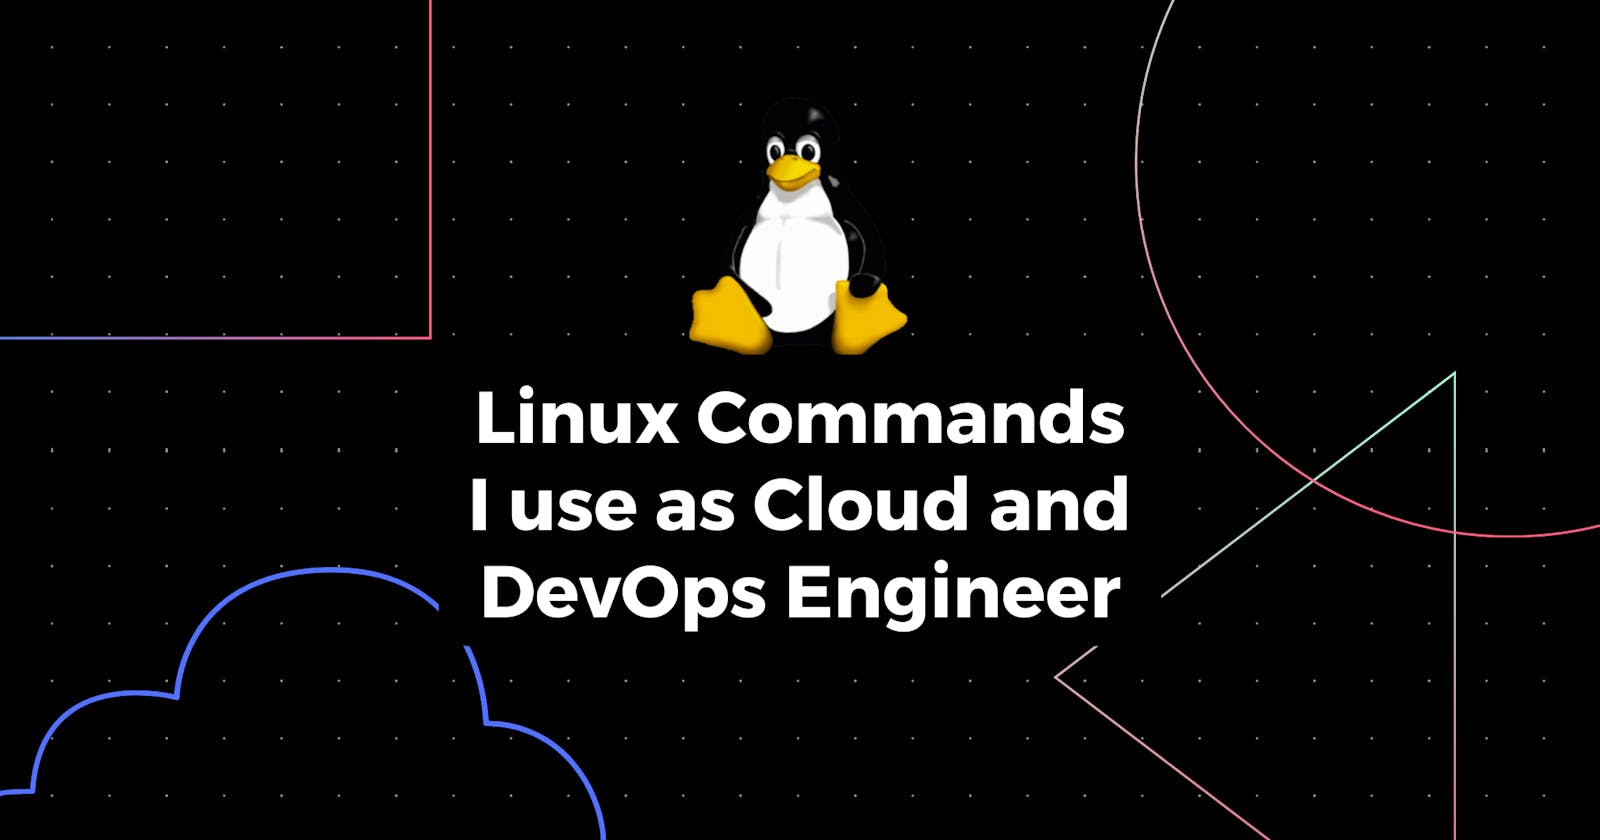 Linux commands I use as a Cloud and DevOps Engineer